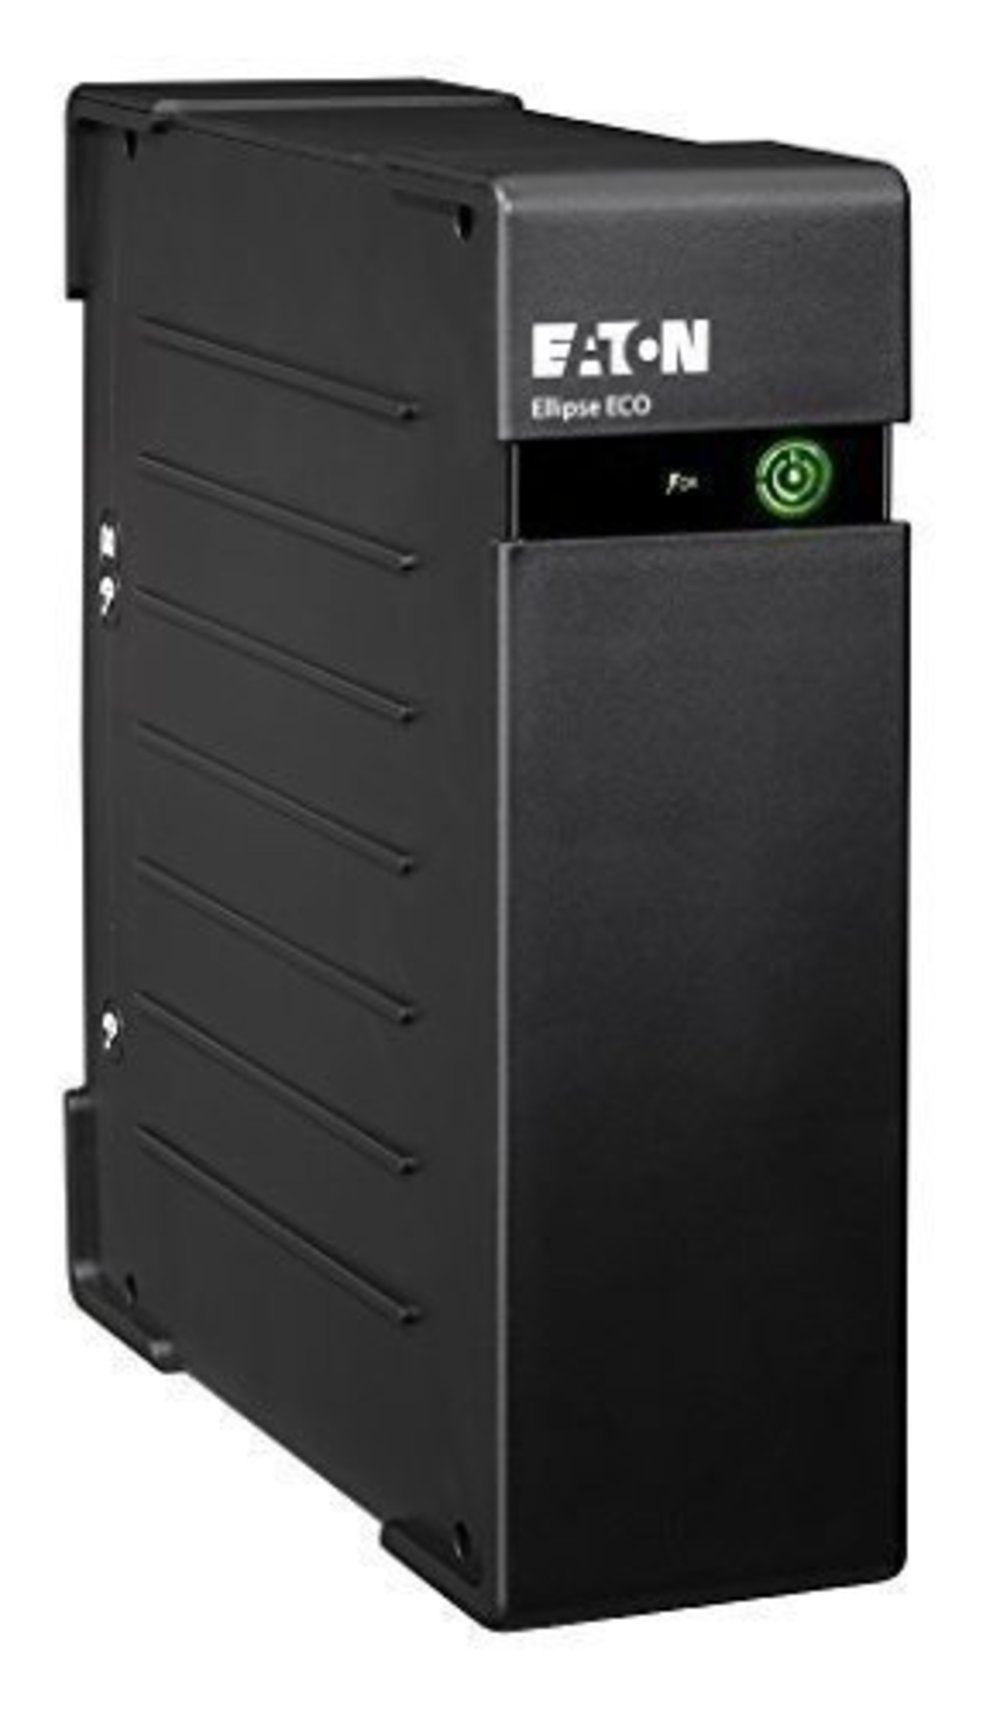 EATON Ellipse ECO 500 DIN - Störungsfreie USV mit hoher Energieeffizienz  - WHY : In this product title, I have included relevant keywords like EATON, Ellipse ECO 500 DIN, USV, hoher Energieeffizienz (high energy efficie